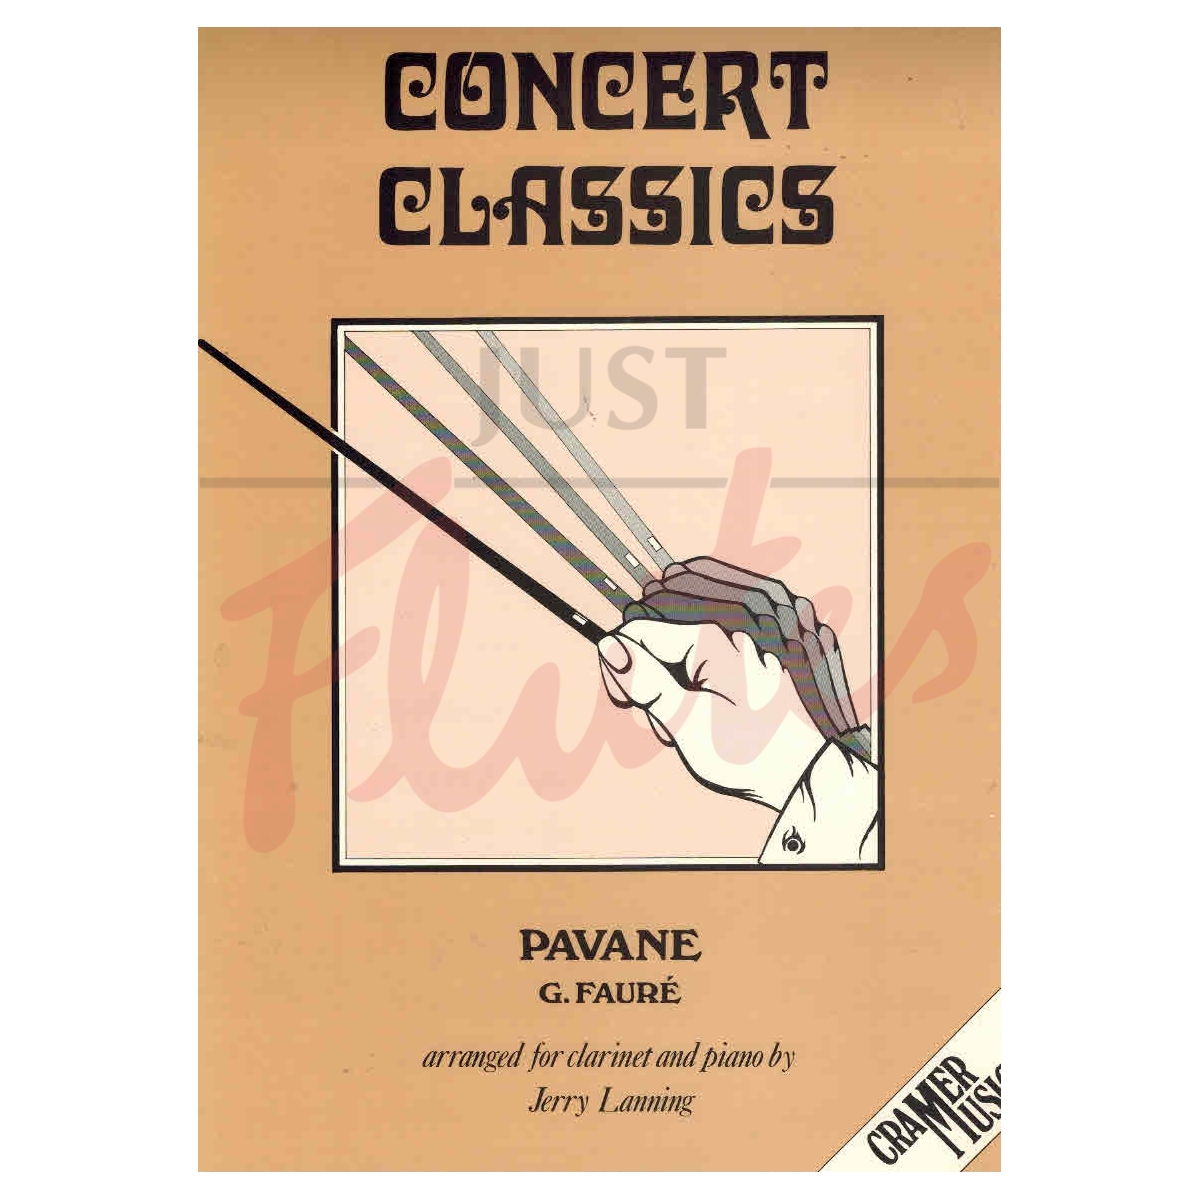 Pavane for Clarinet and Piano